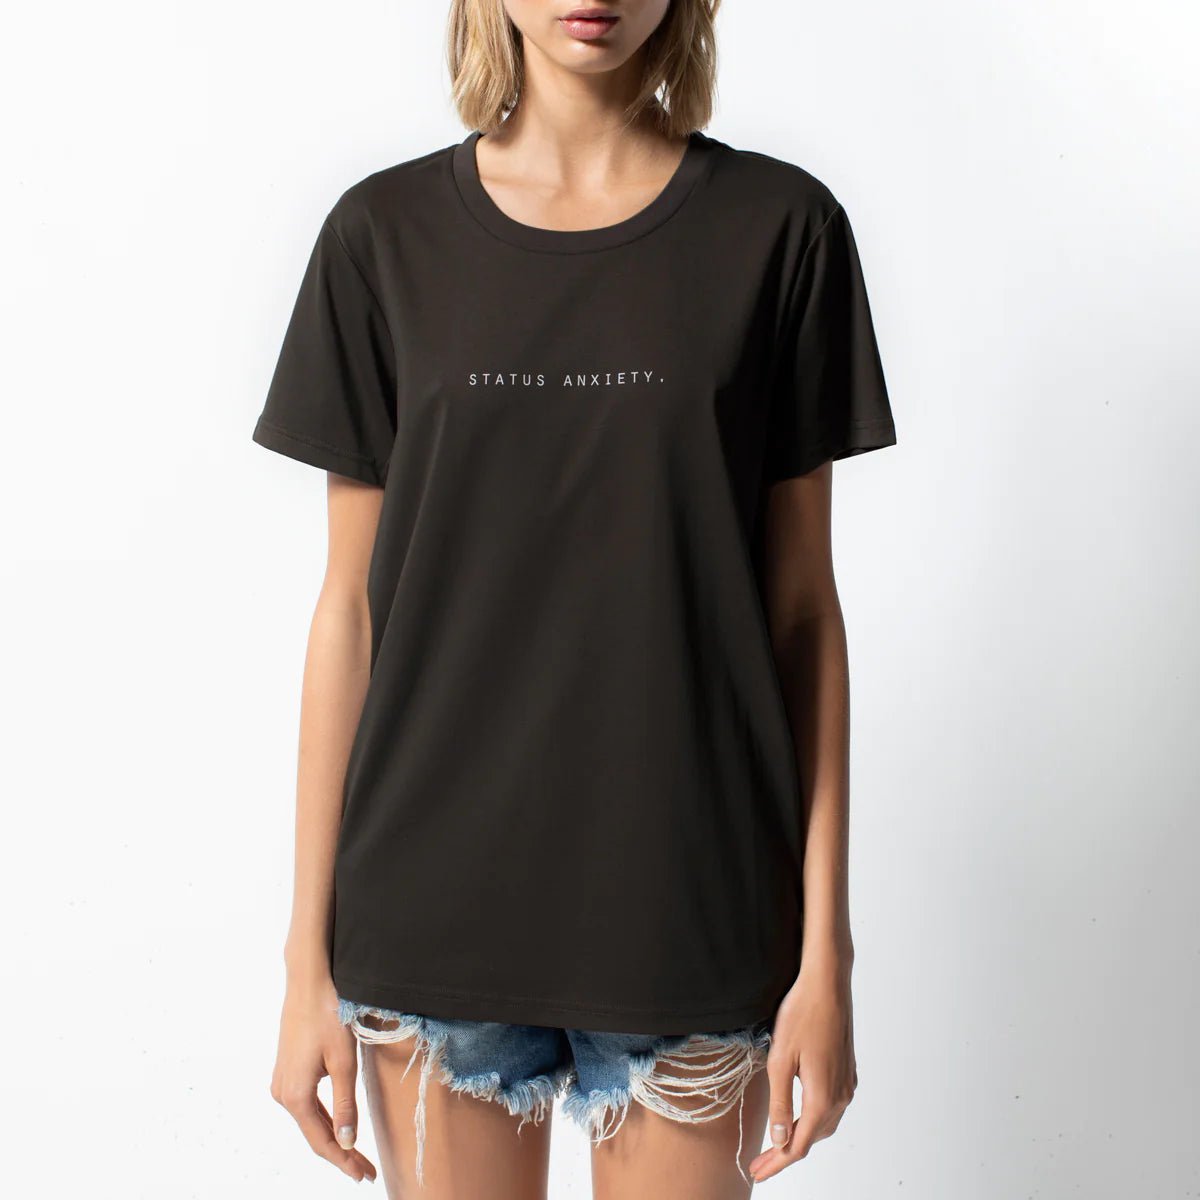 THINK IT OVER WOMEN'S TEE // CLASSIC TEE / BLACK ~ Status Anxiety ~